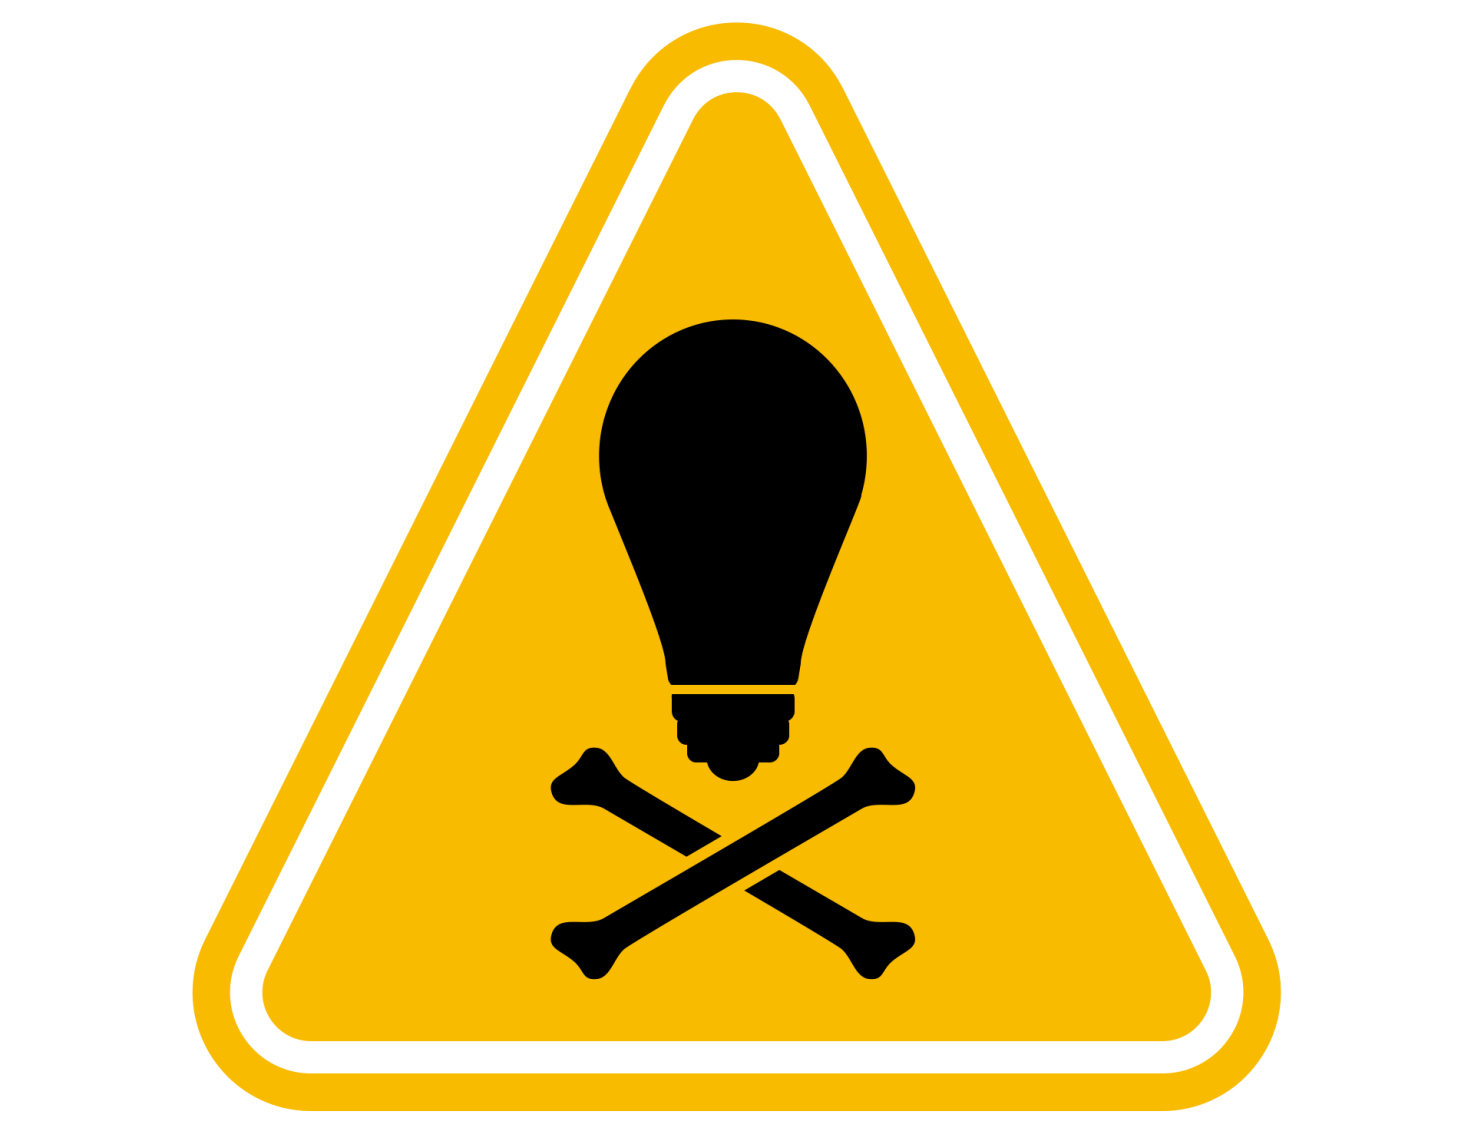 A yellow triangular warning sign with a lightbulb symbol and crossbones below it.